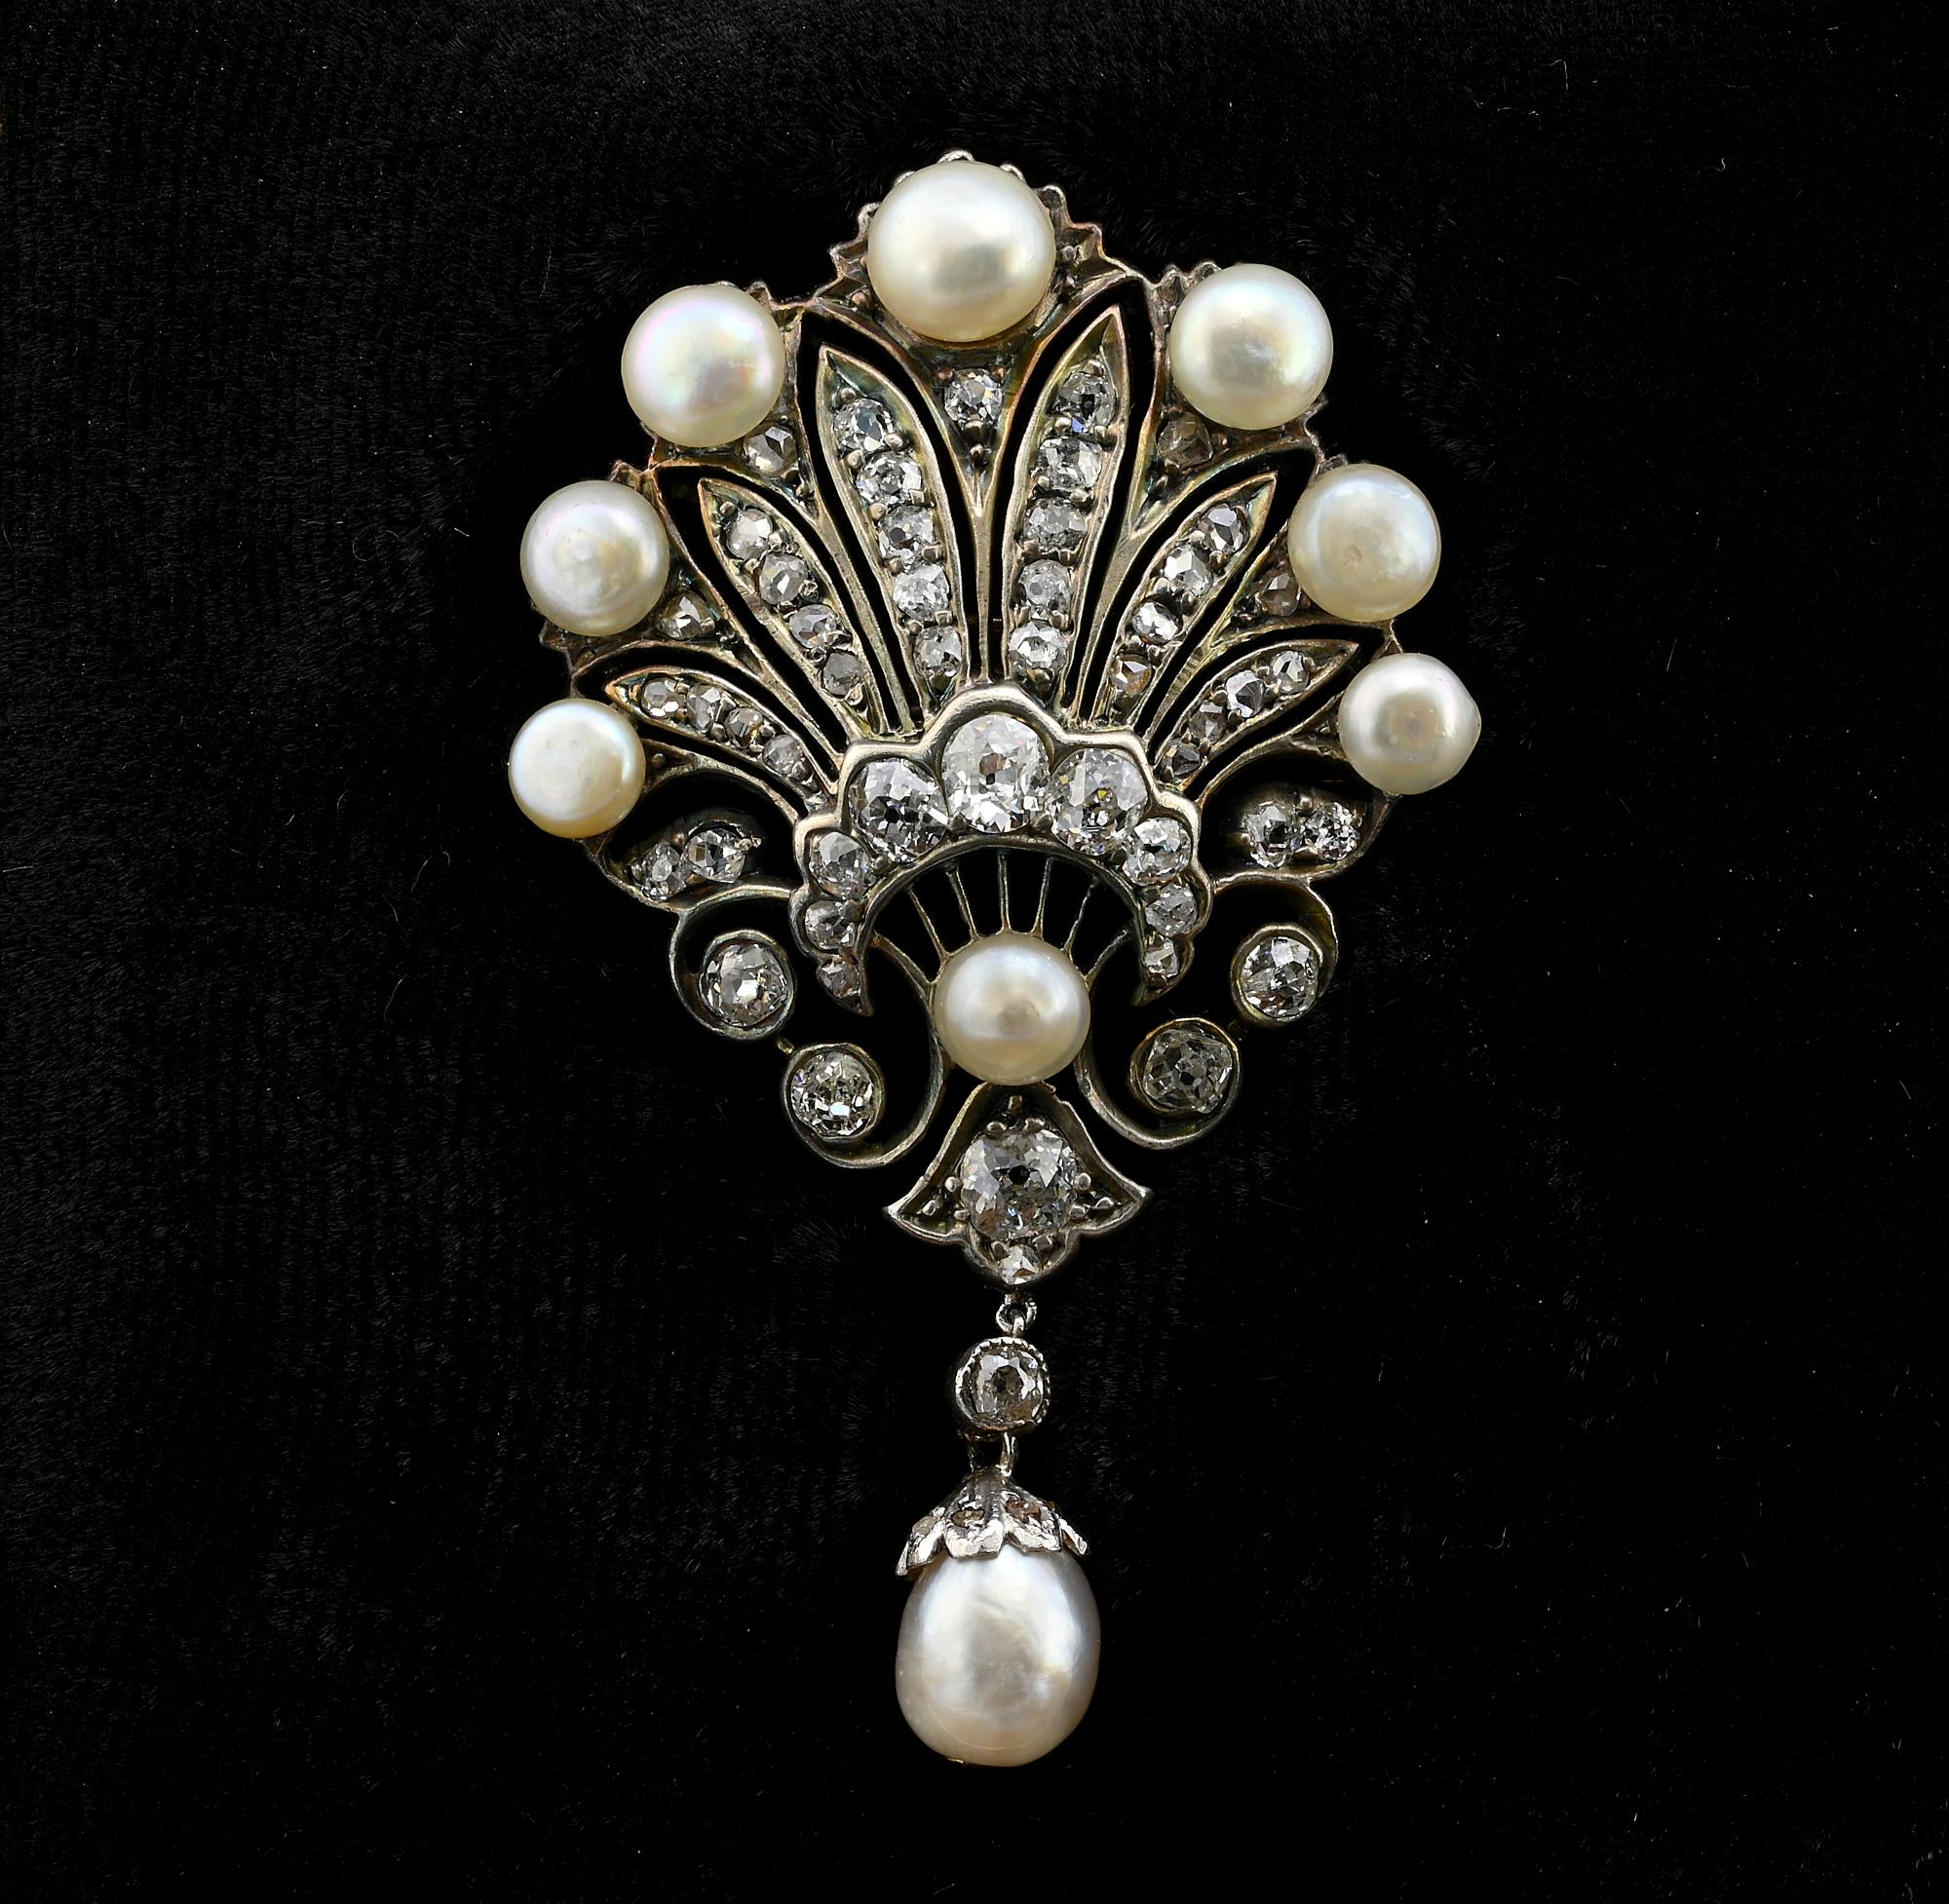 his lovely antique brooch is Victorian period, 1870 circa
Elegantly designed in a triumph of Diamond rays complemented by natural not nucleated salt sea Pearls and swinging drop Pearl as finial, coming with related lab certification
Pearls are